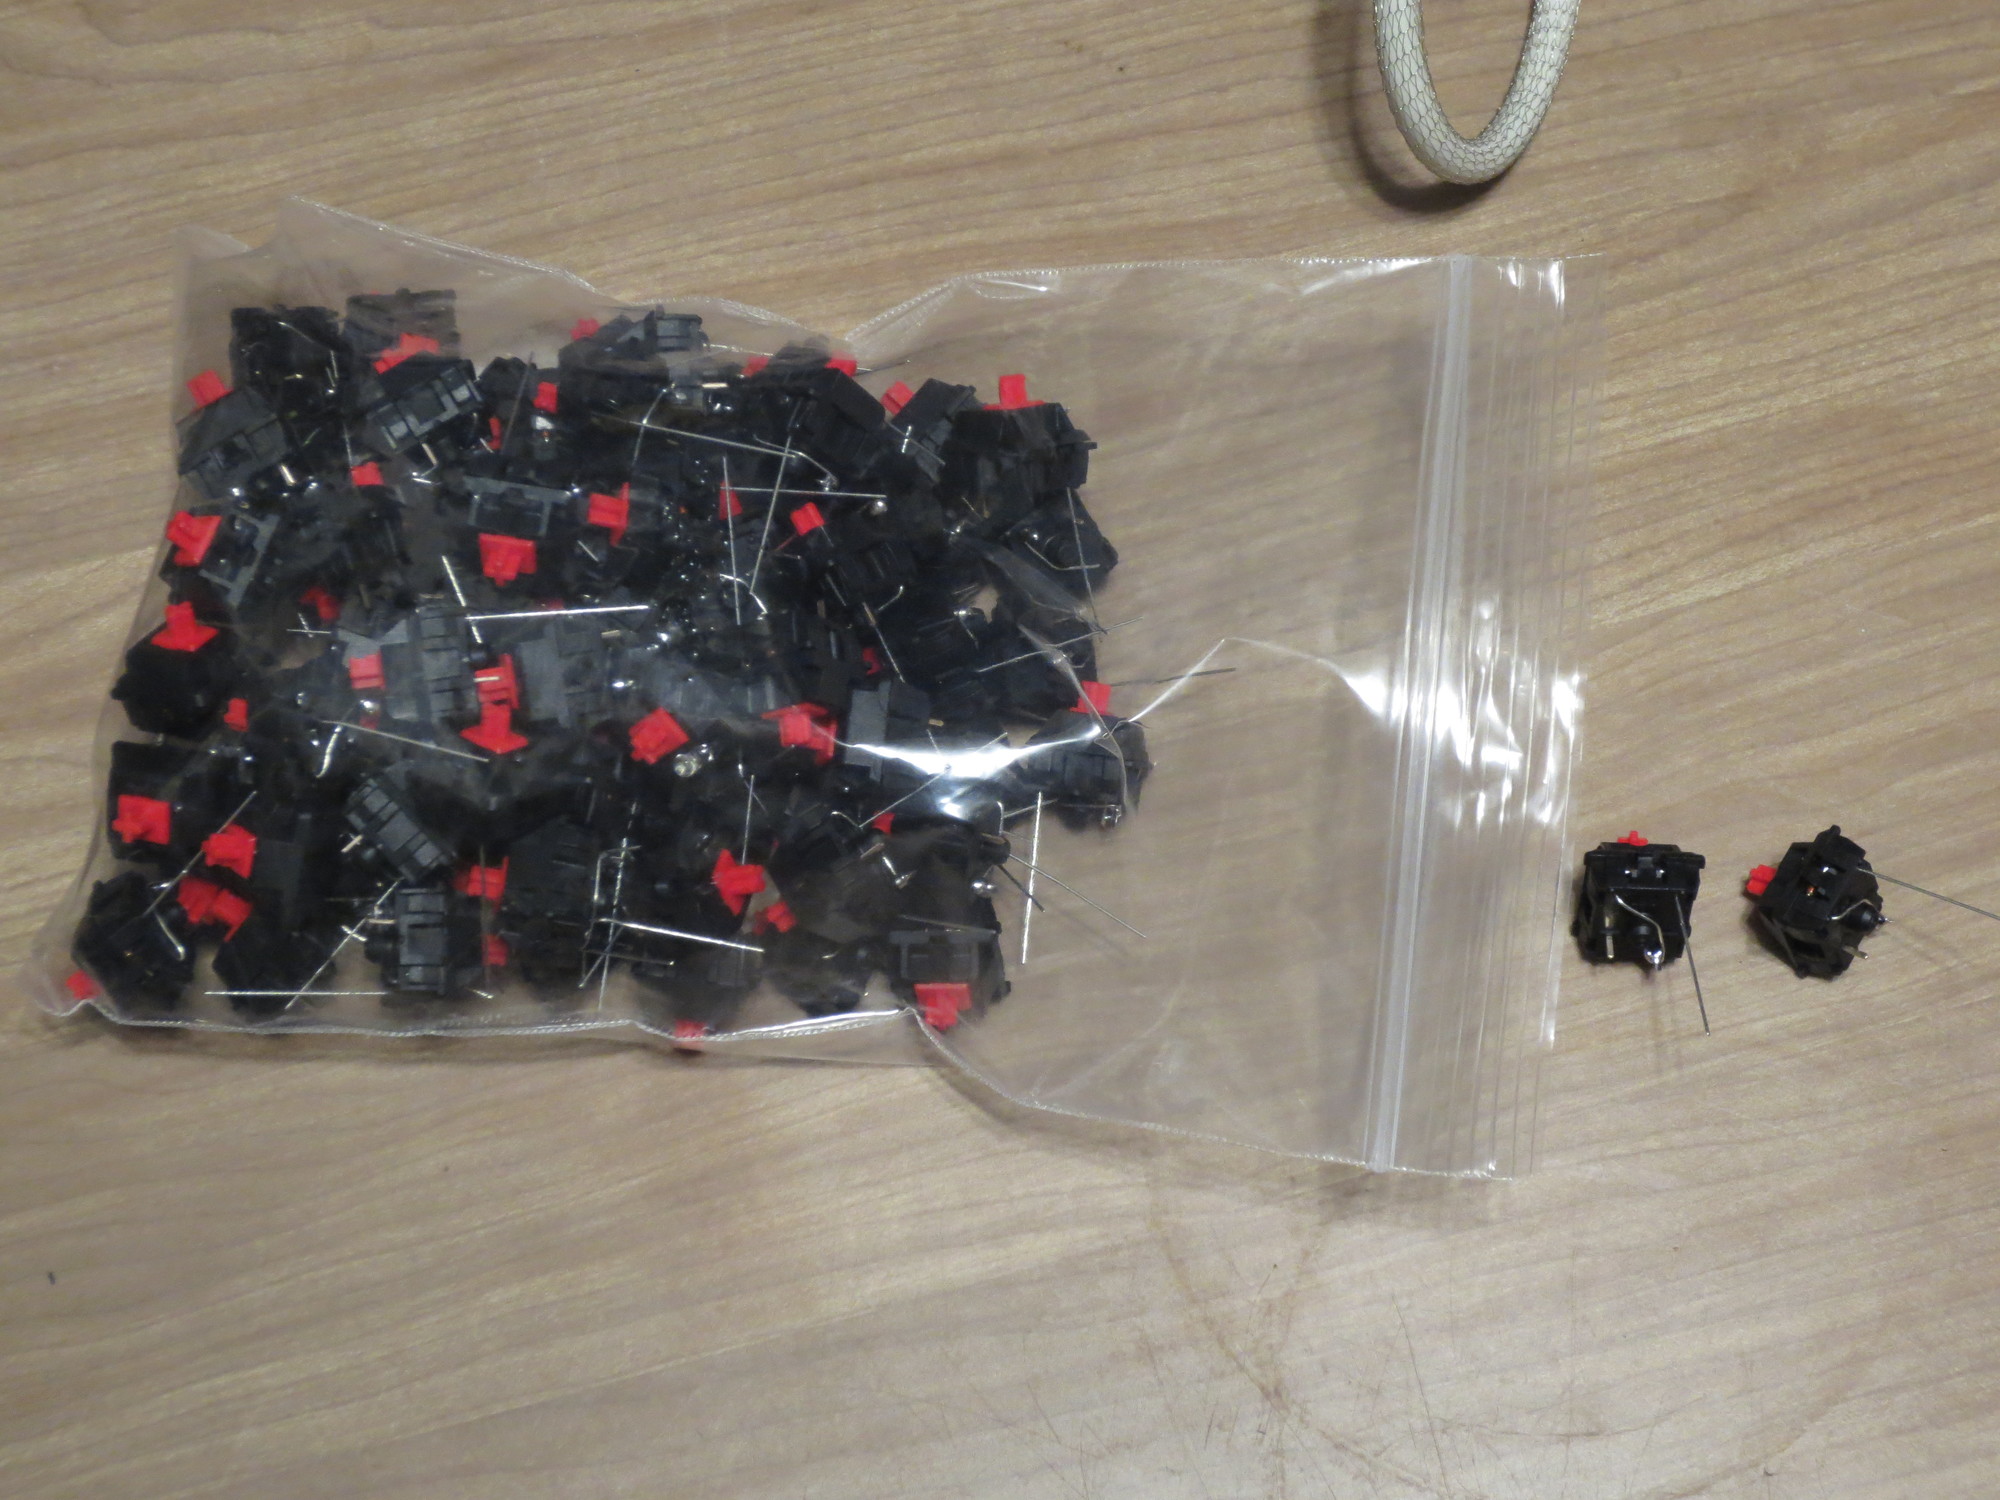 bag of dioded modules